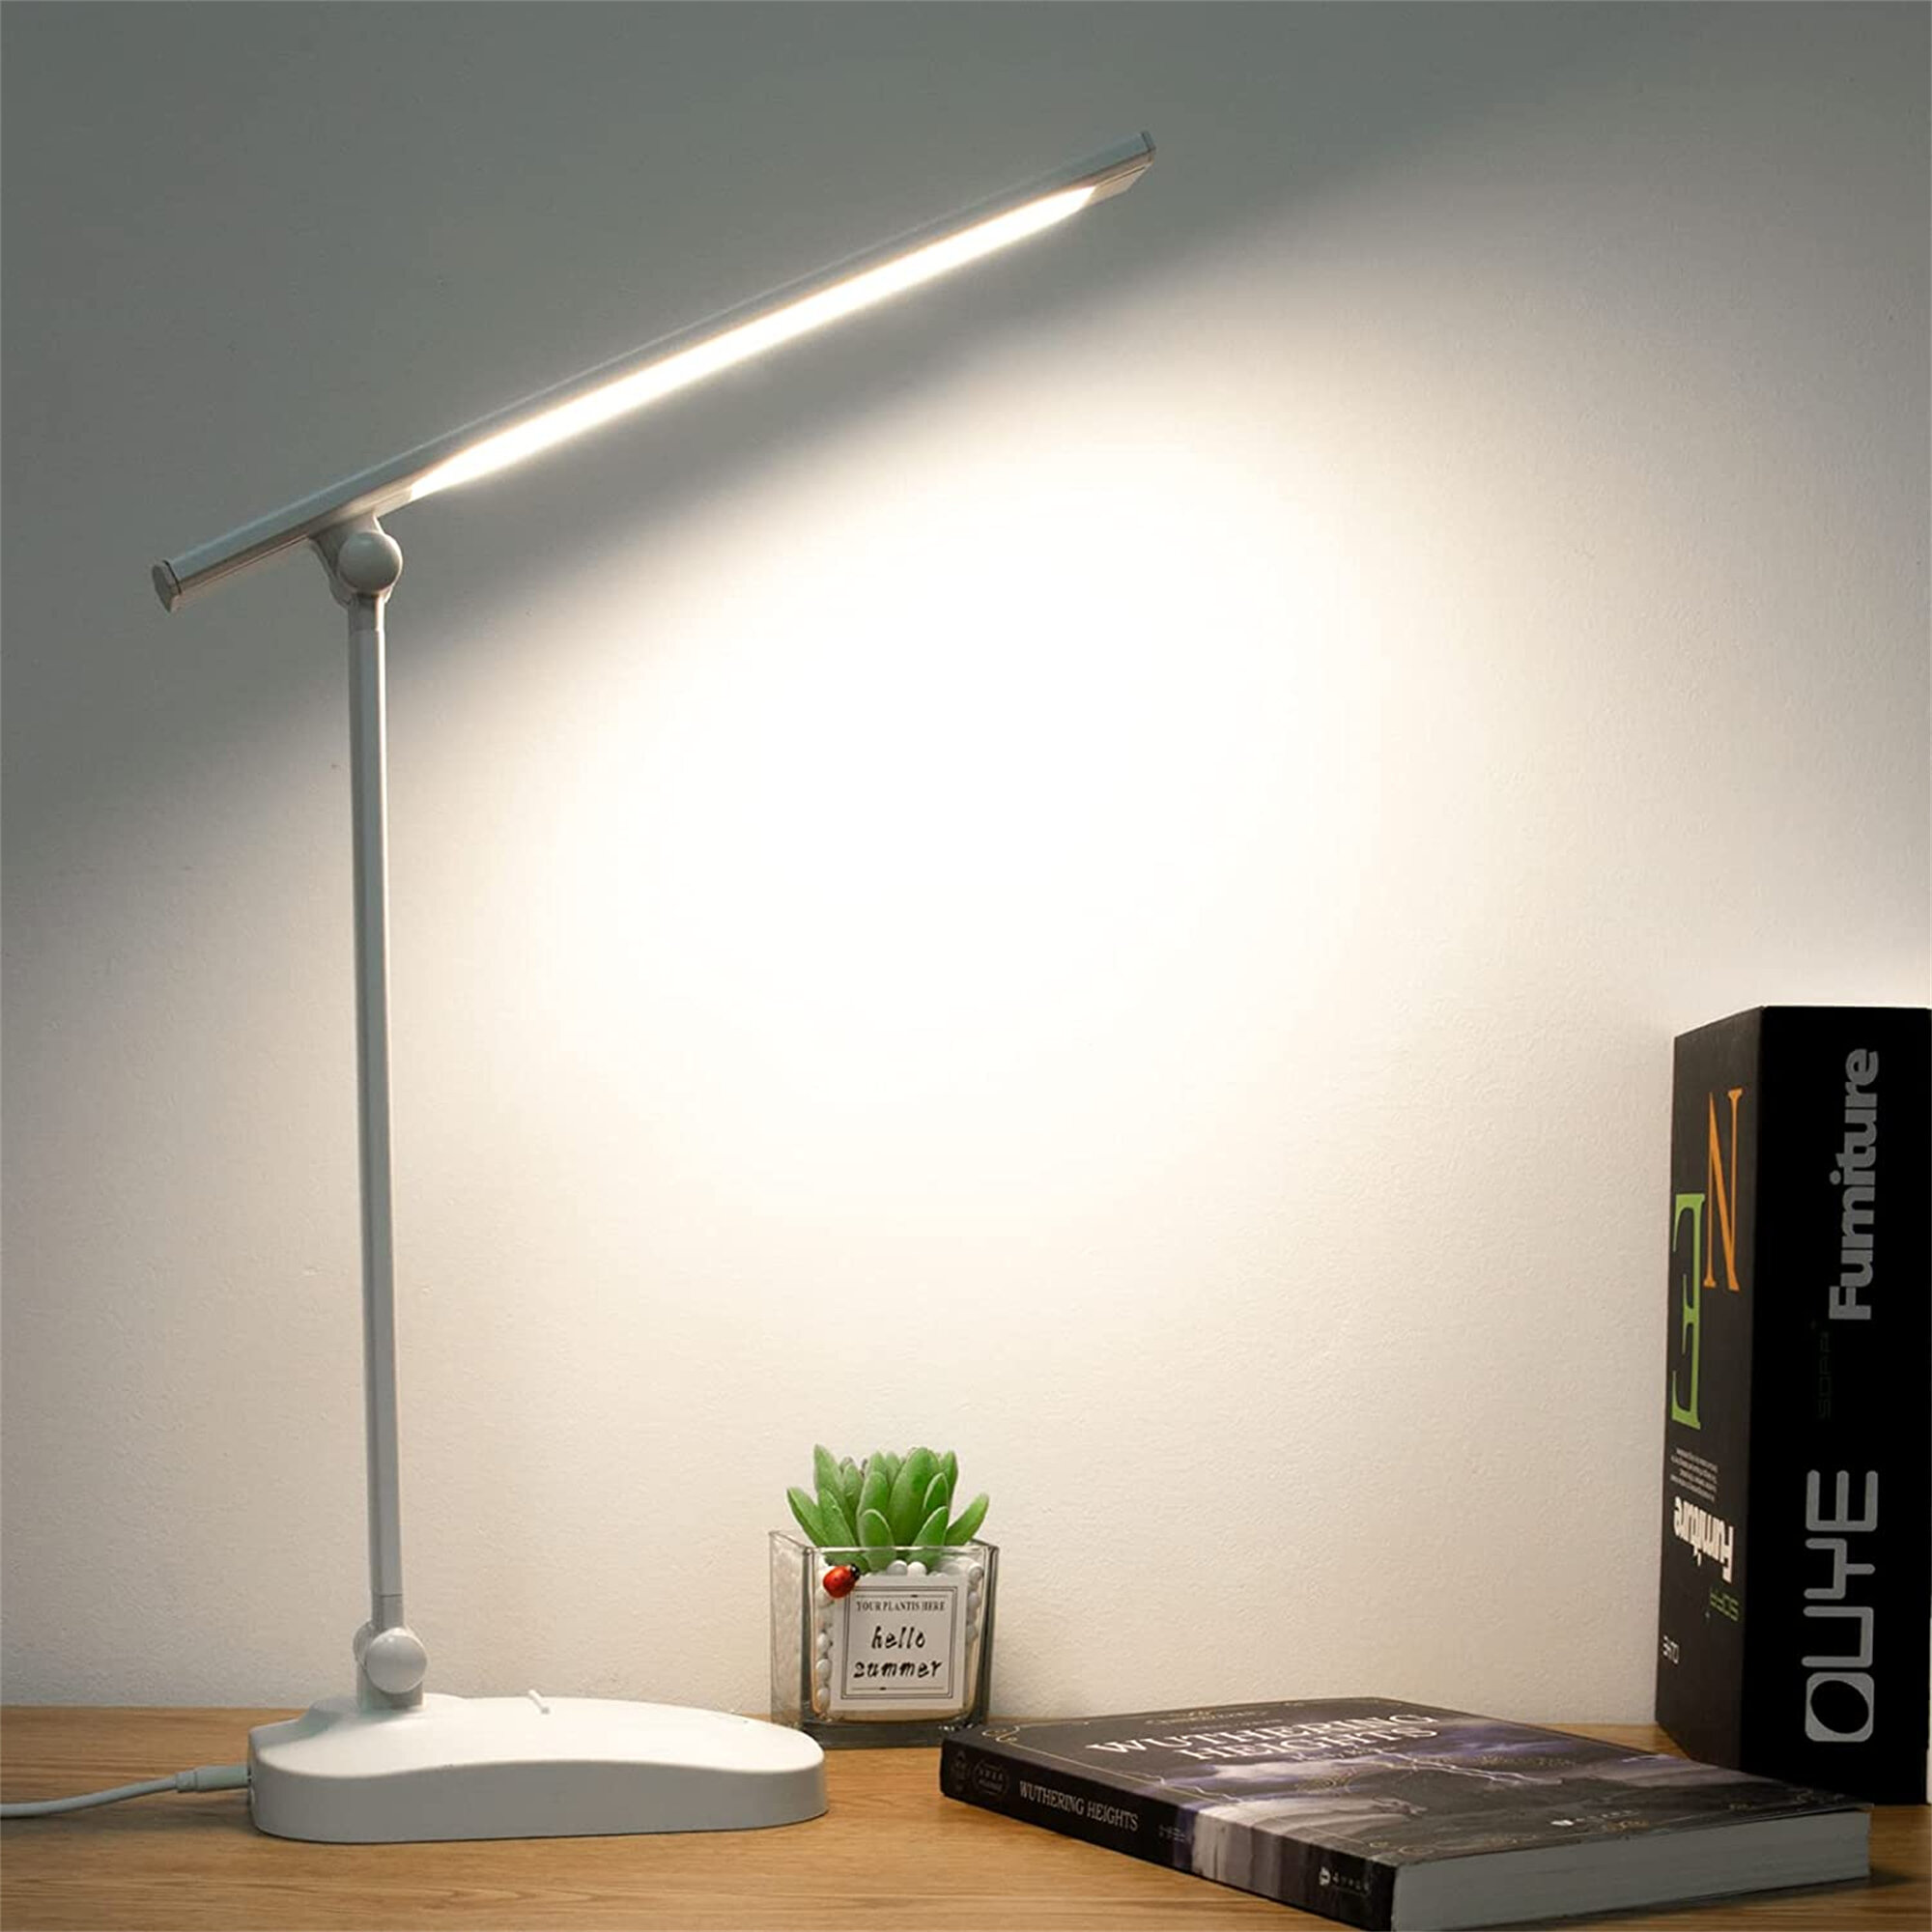 Cordless Dimmable Table Lamp Eye-Caring LED Light Lamp for The Bedroom or Office LITTIL Bright LED Desk Lamp with Touch Control 